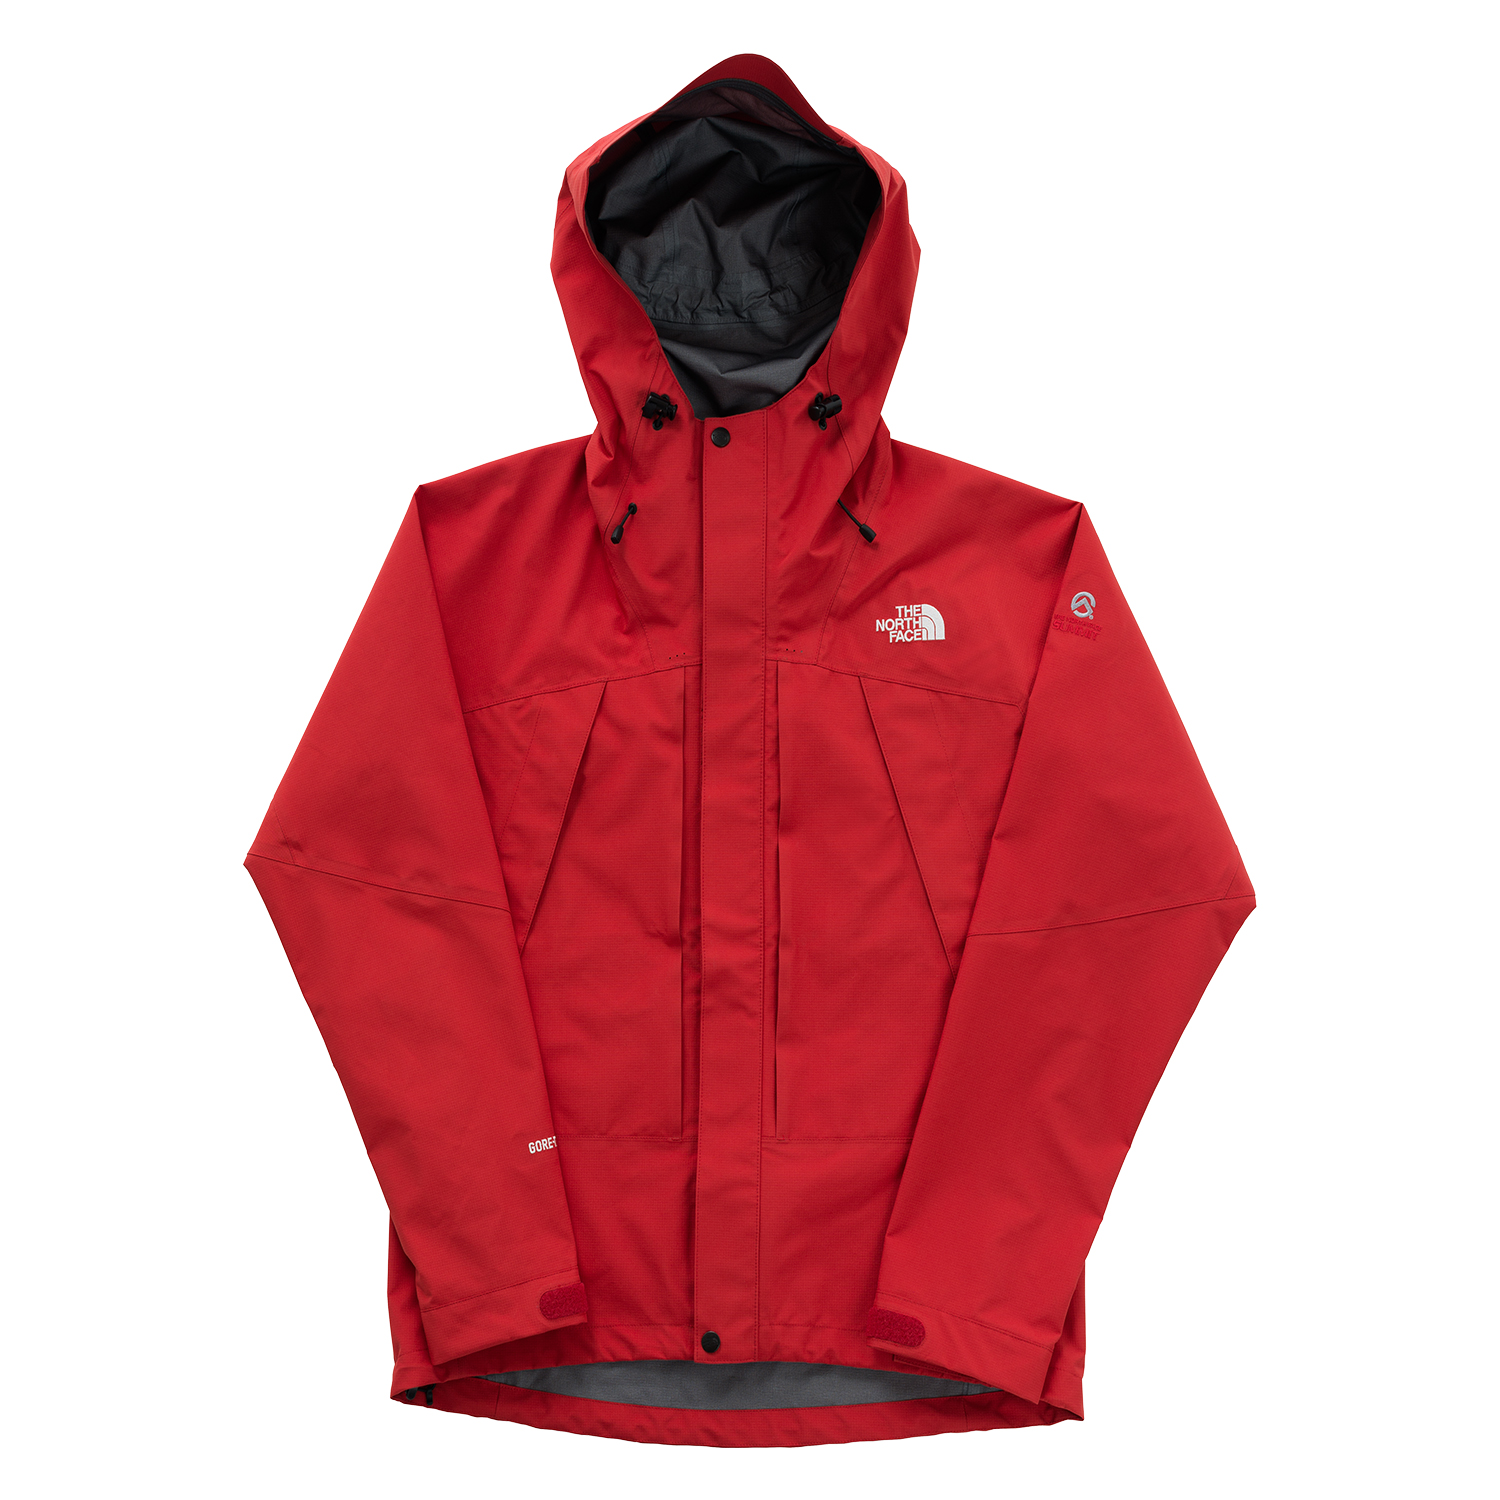 THE NORTH FACE - ALL MOUNTAIN JACKET